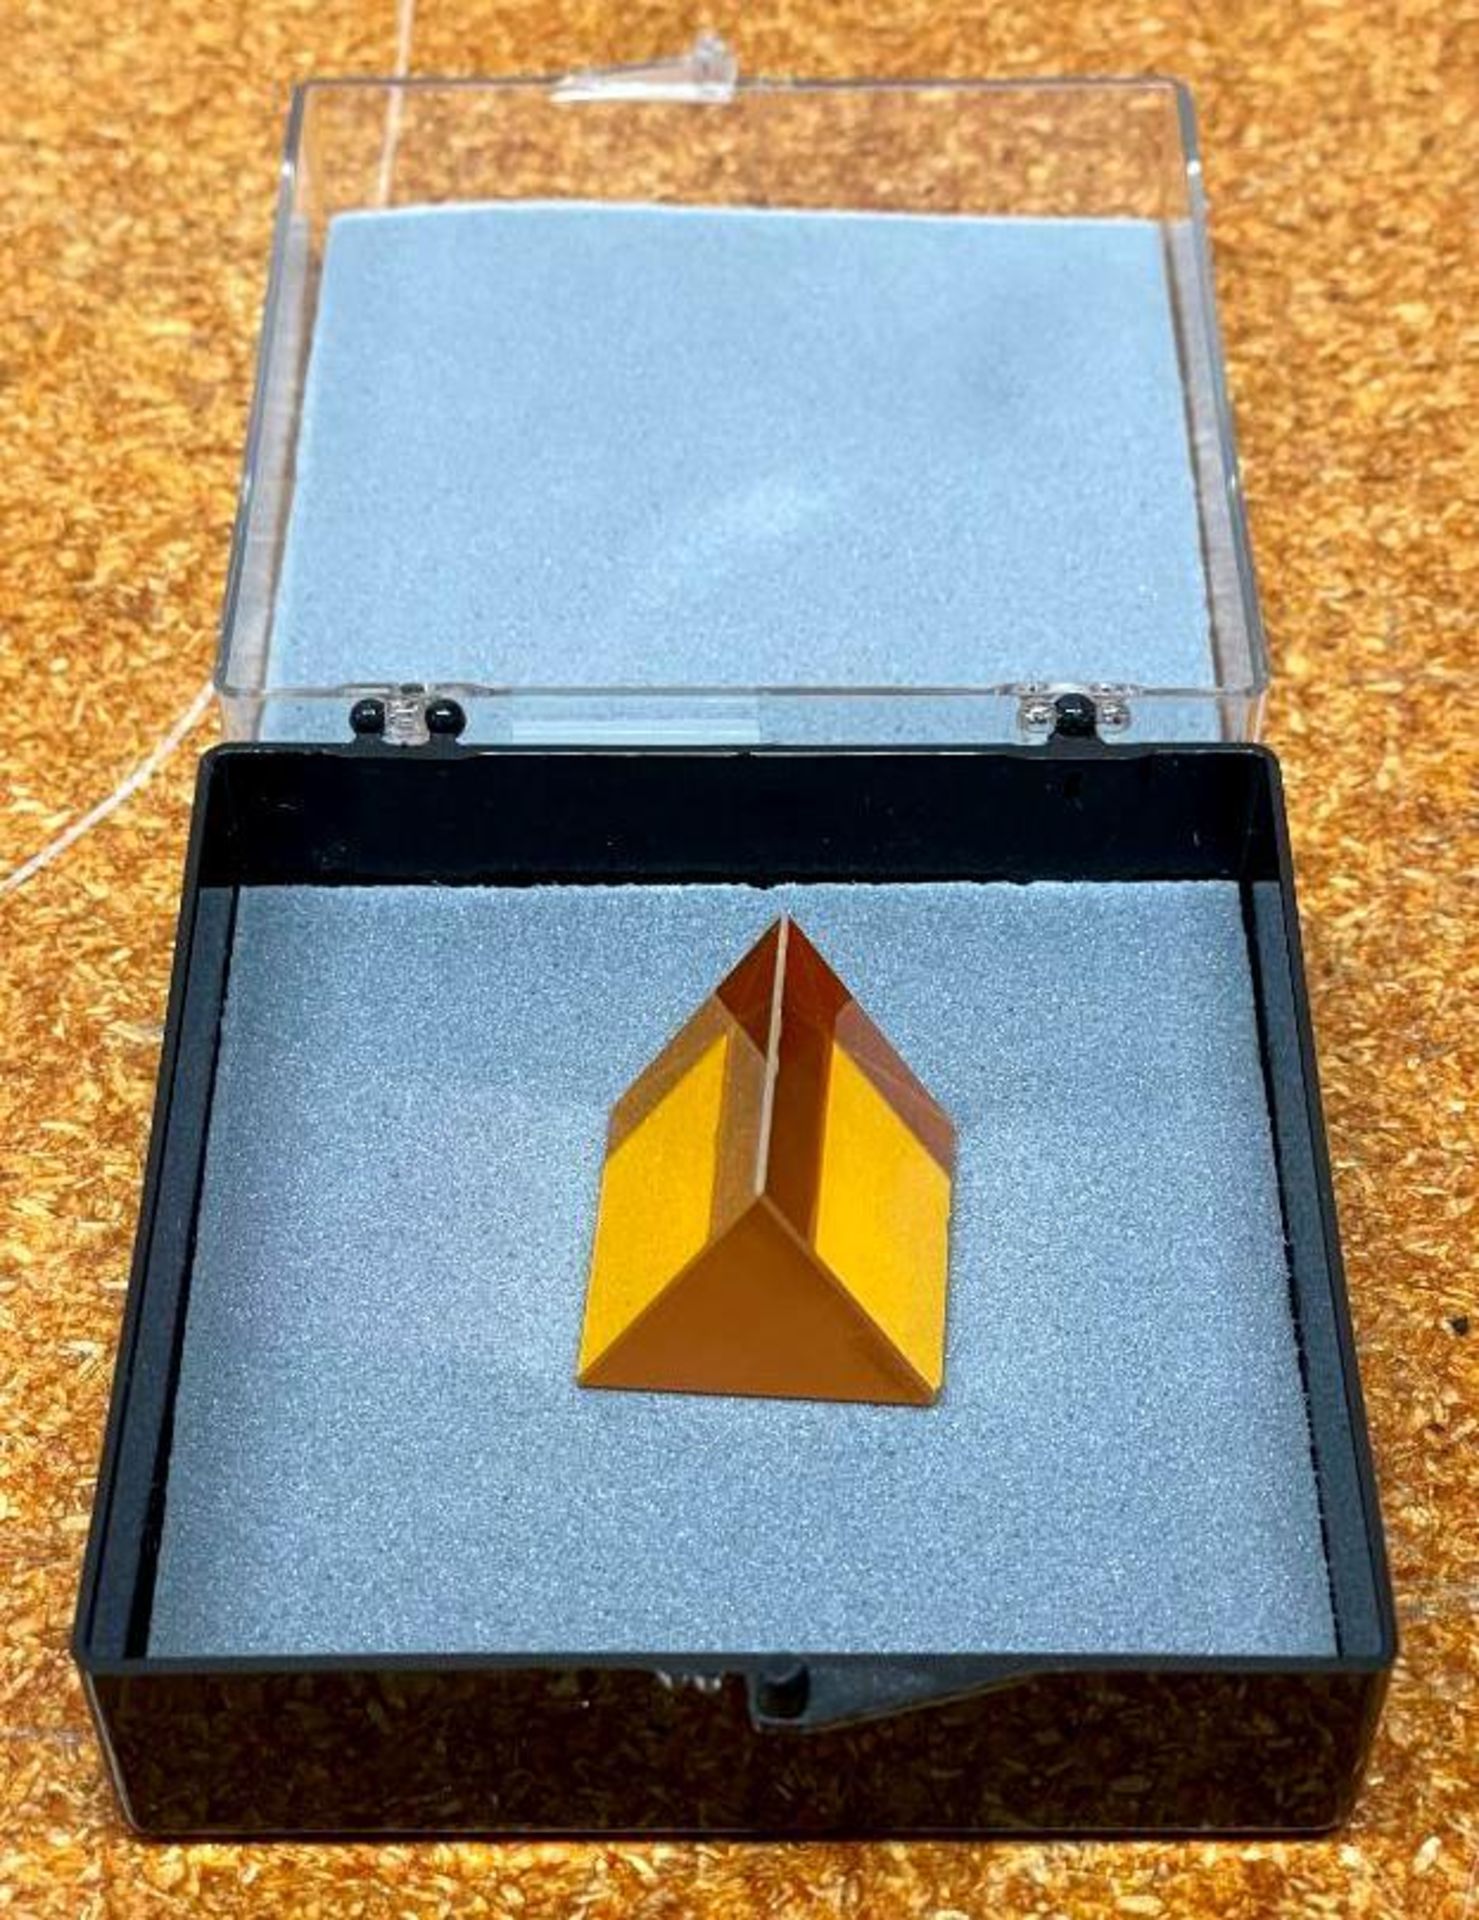 1" ZnSe EQUILATERAL PRISM BRAND/MODEL: JANOS A1231-025 INFORMATION: ZnSe PRISM QTY: 1